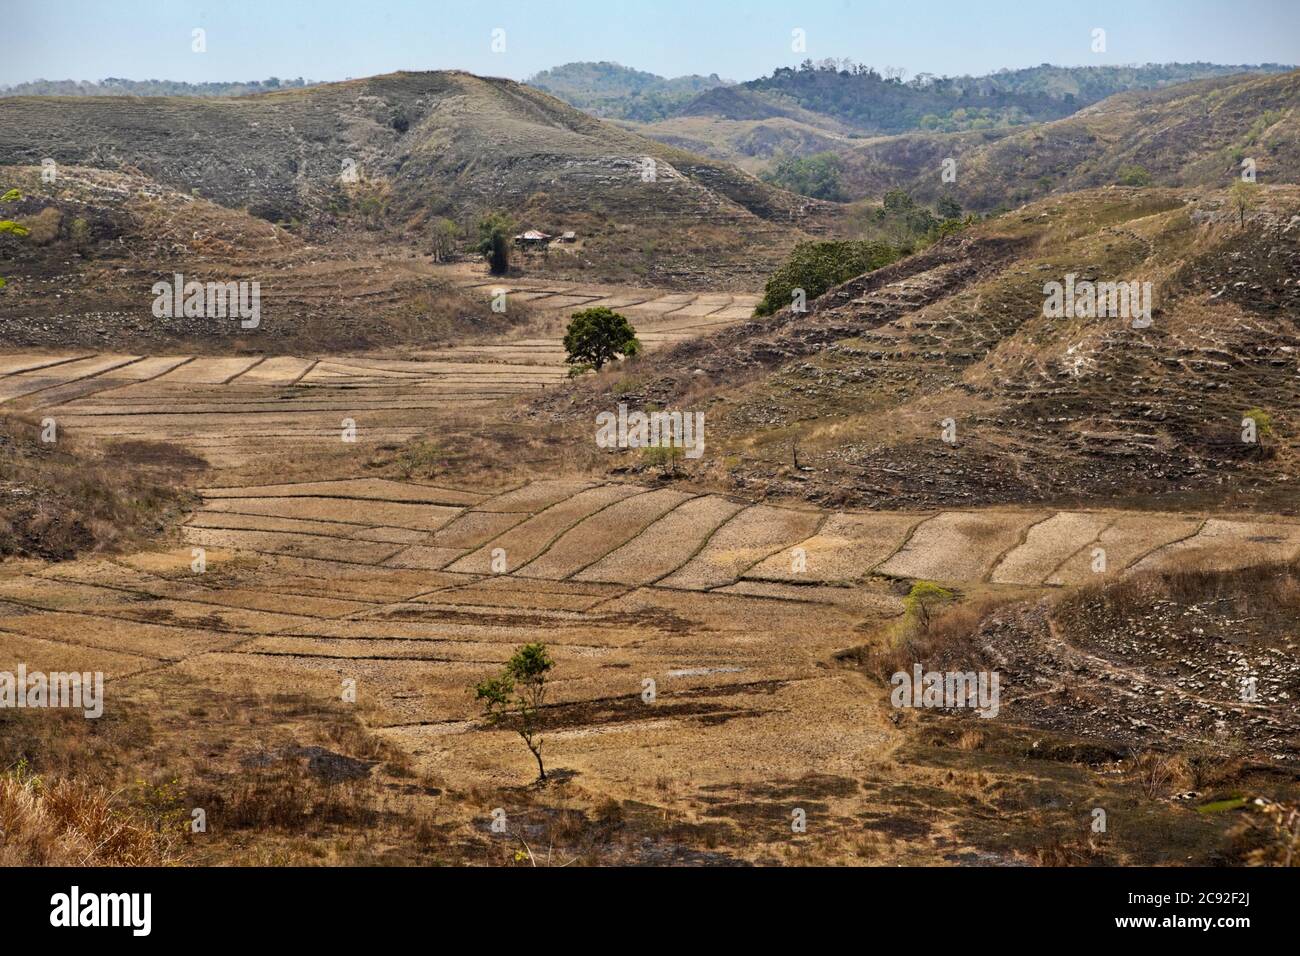 Dry agricultural fields during dry season in East Sumba, East Nusa Tenggara, Indonesia. Stock Photo